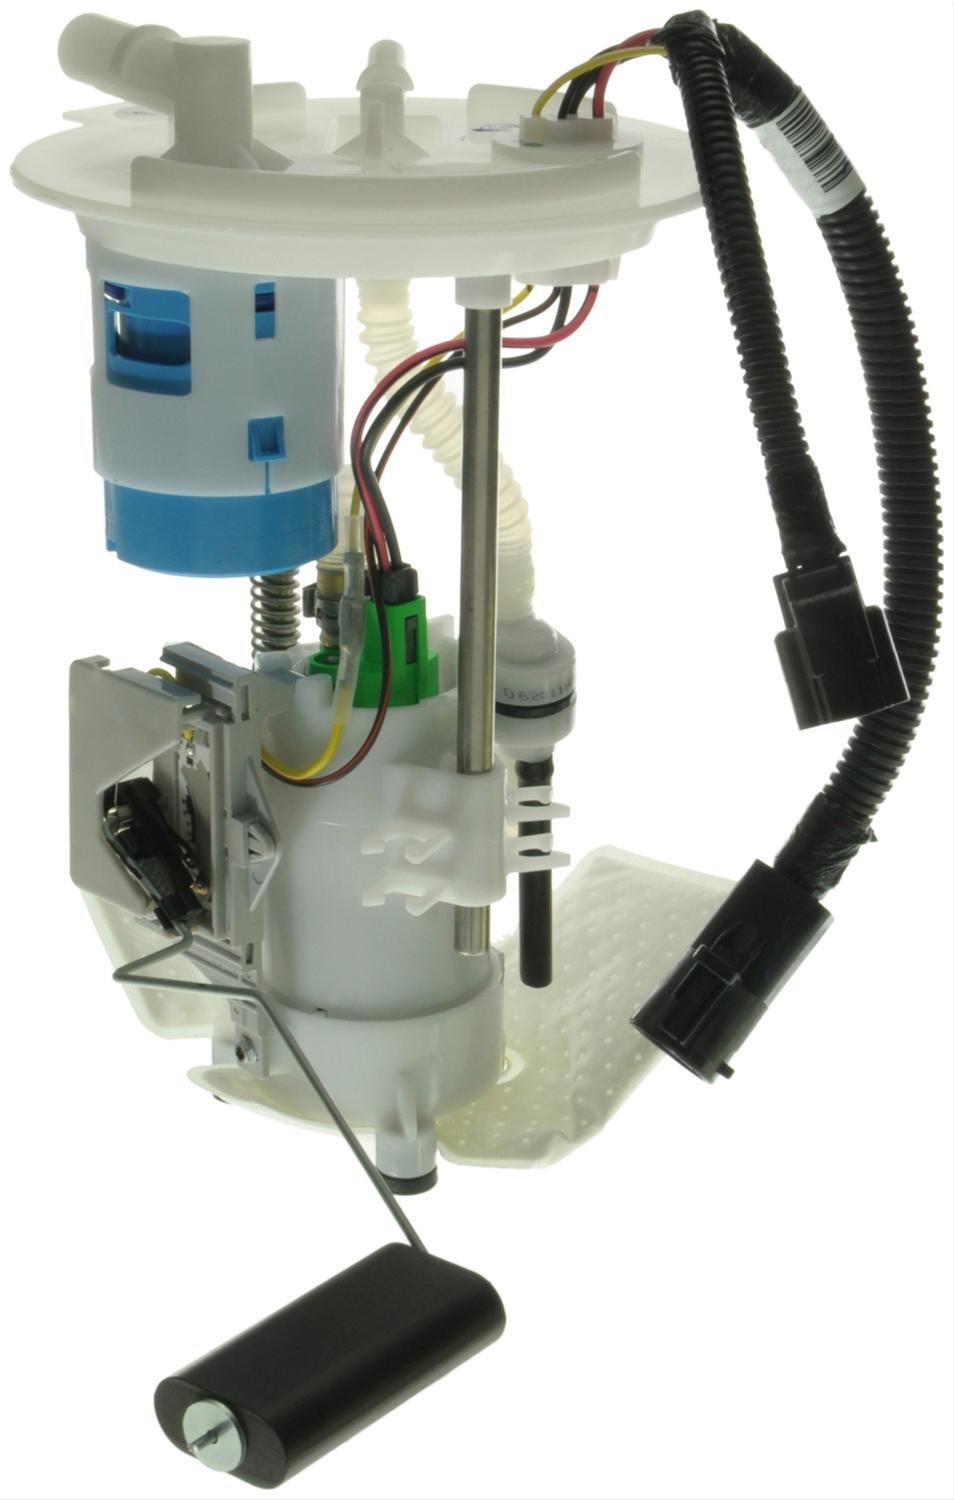 OE Ford/Mercury Replacement Fuel Pump Module Assembly for 2010 Ford Explorer/Mercury Mountaineer